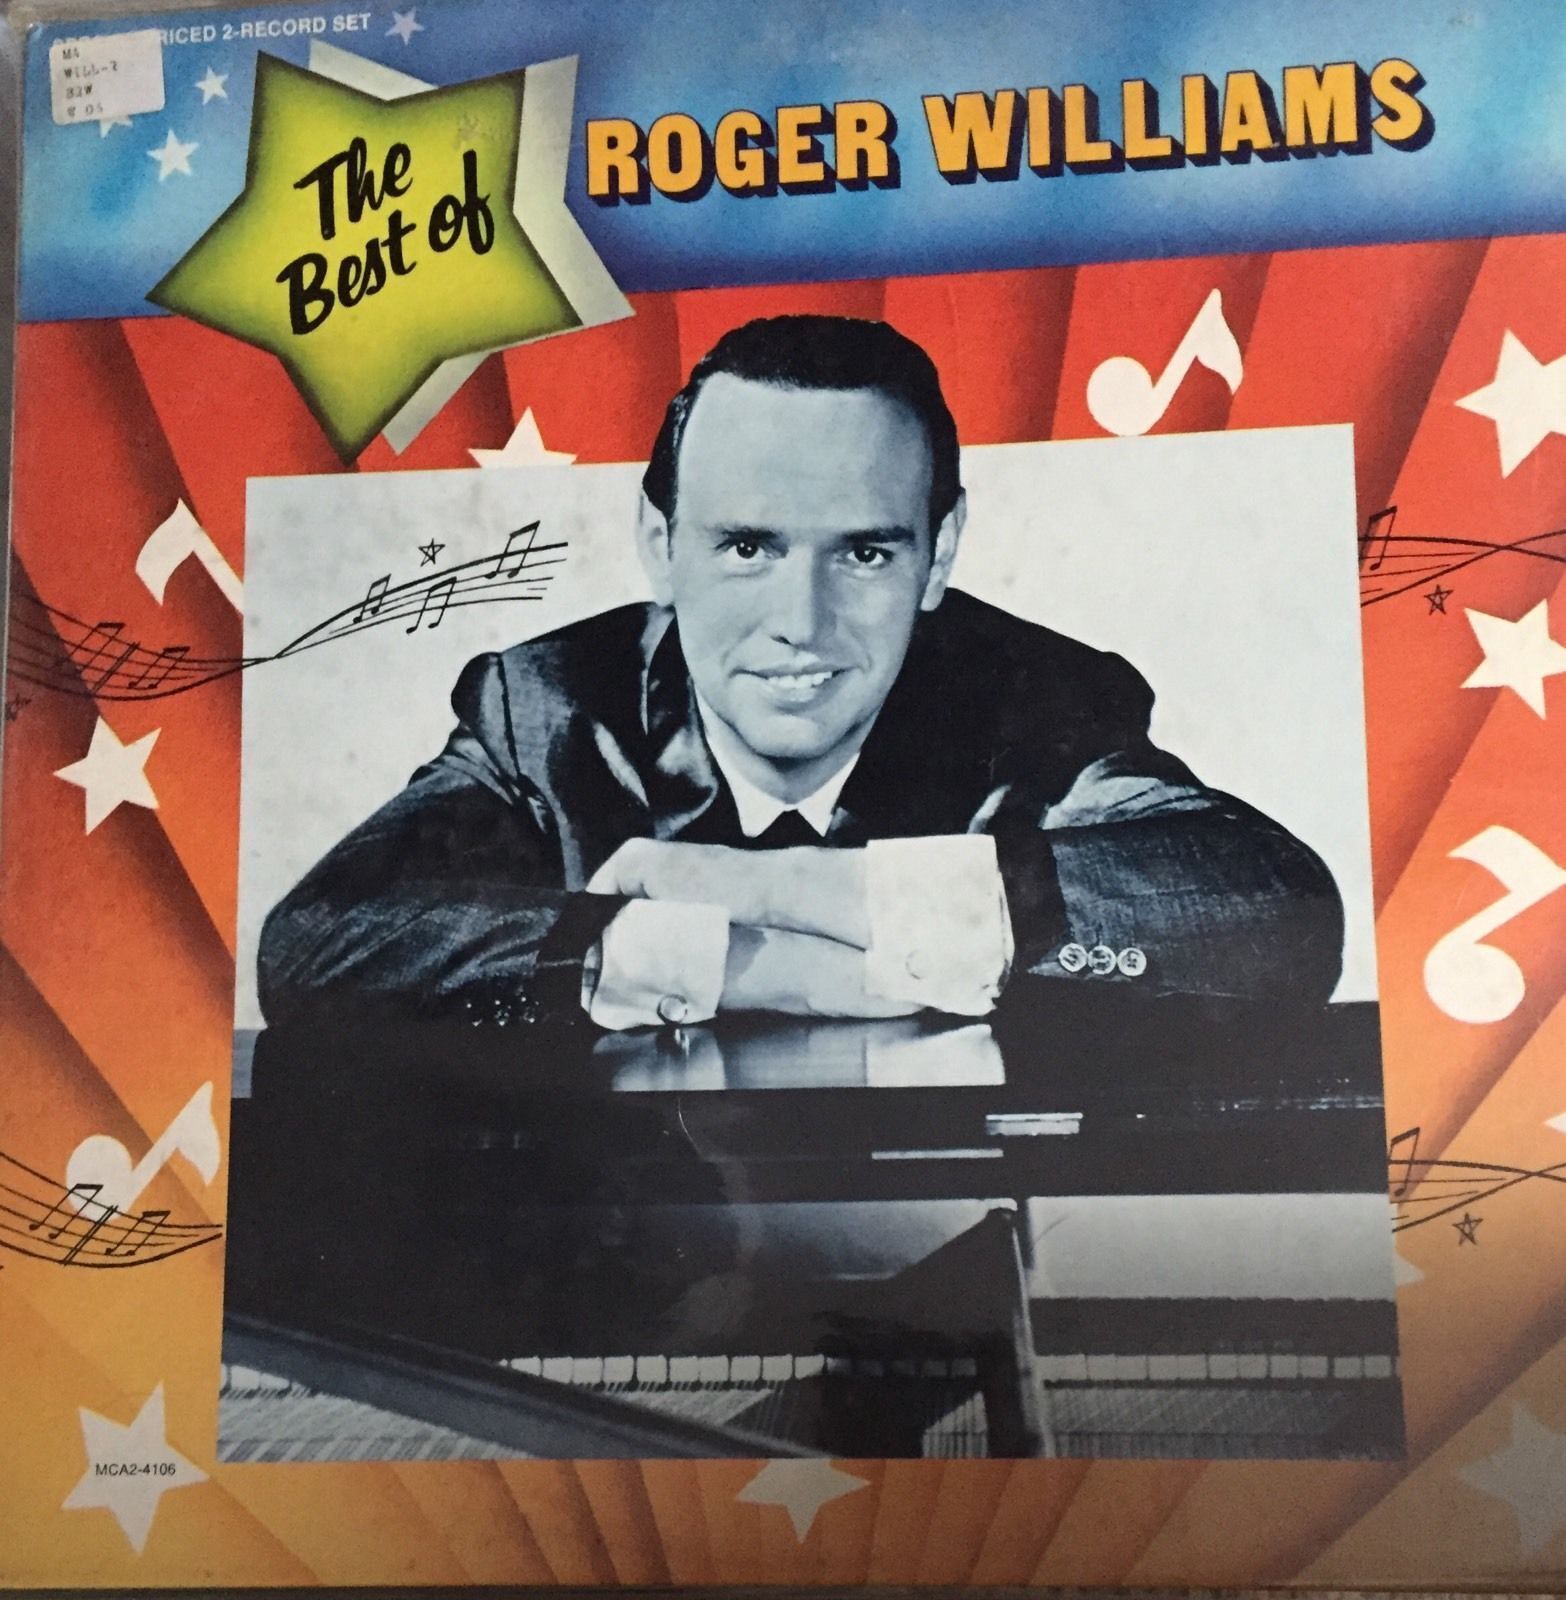 The Best of Roger Williams LP 33 RPM ALBUM Very Good Condition • Ex-Library Copy